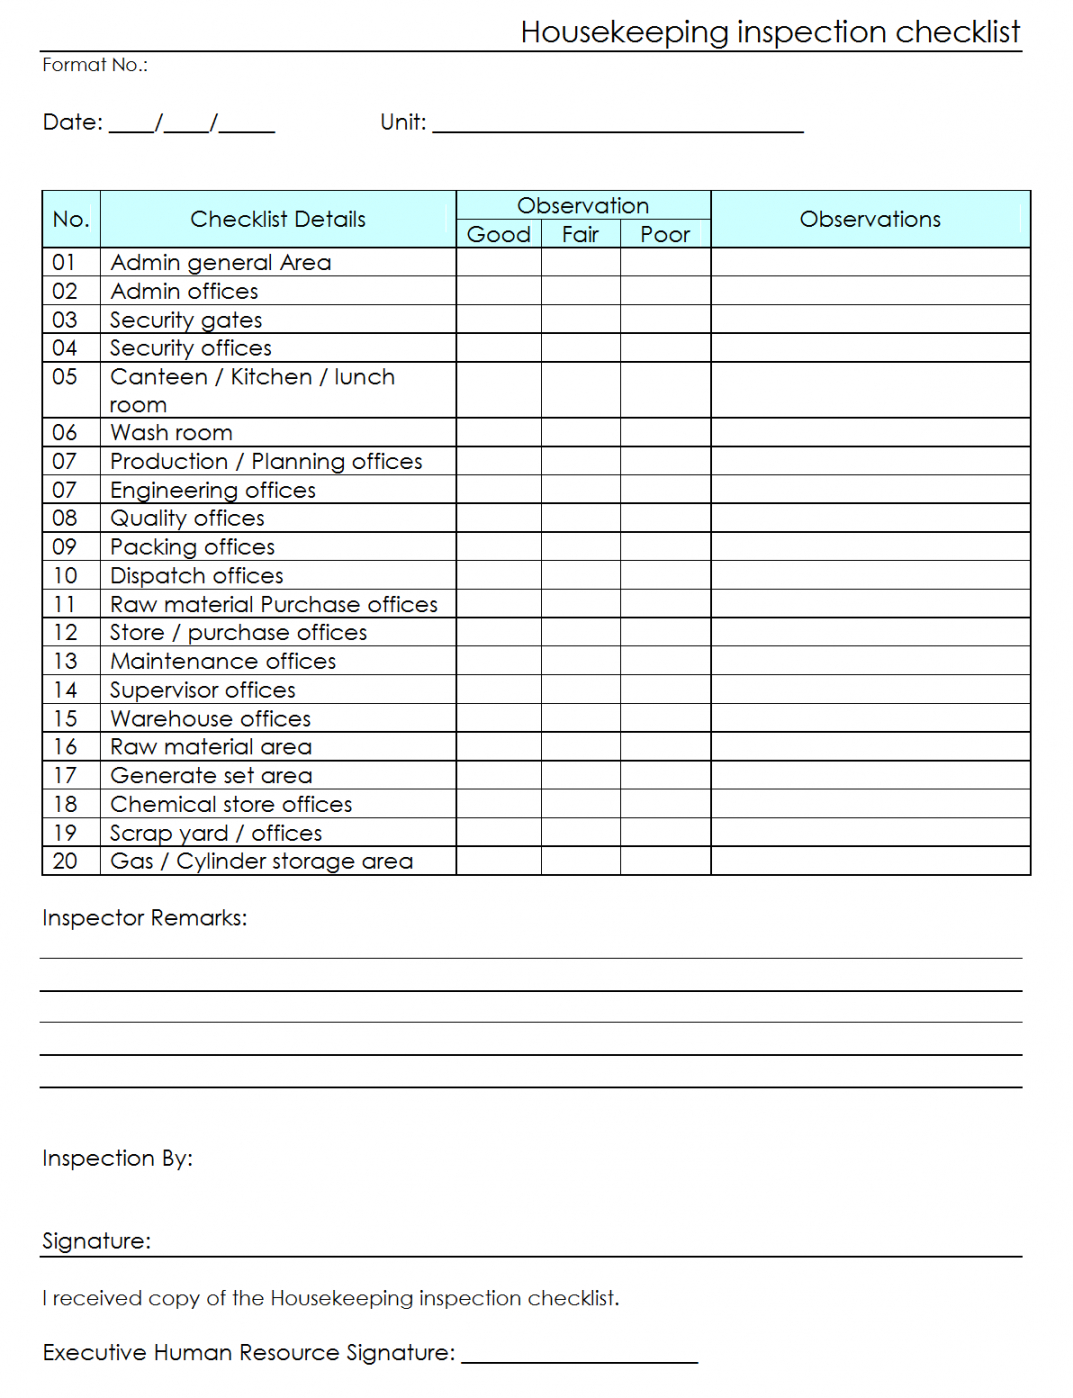 free workplace housekeeping inspection checklist for factory store visit checklist template doc